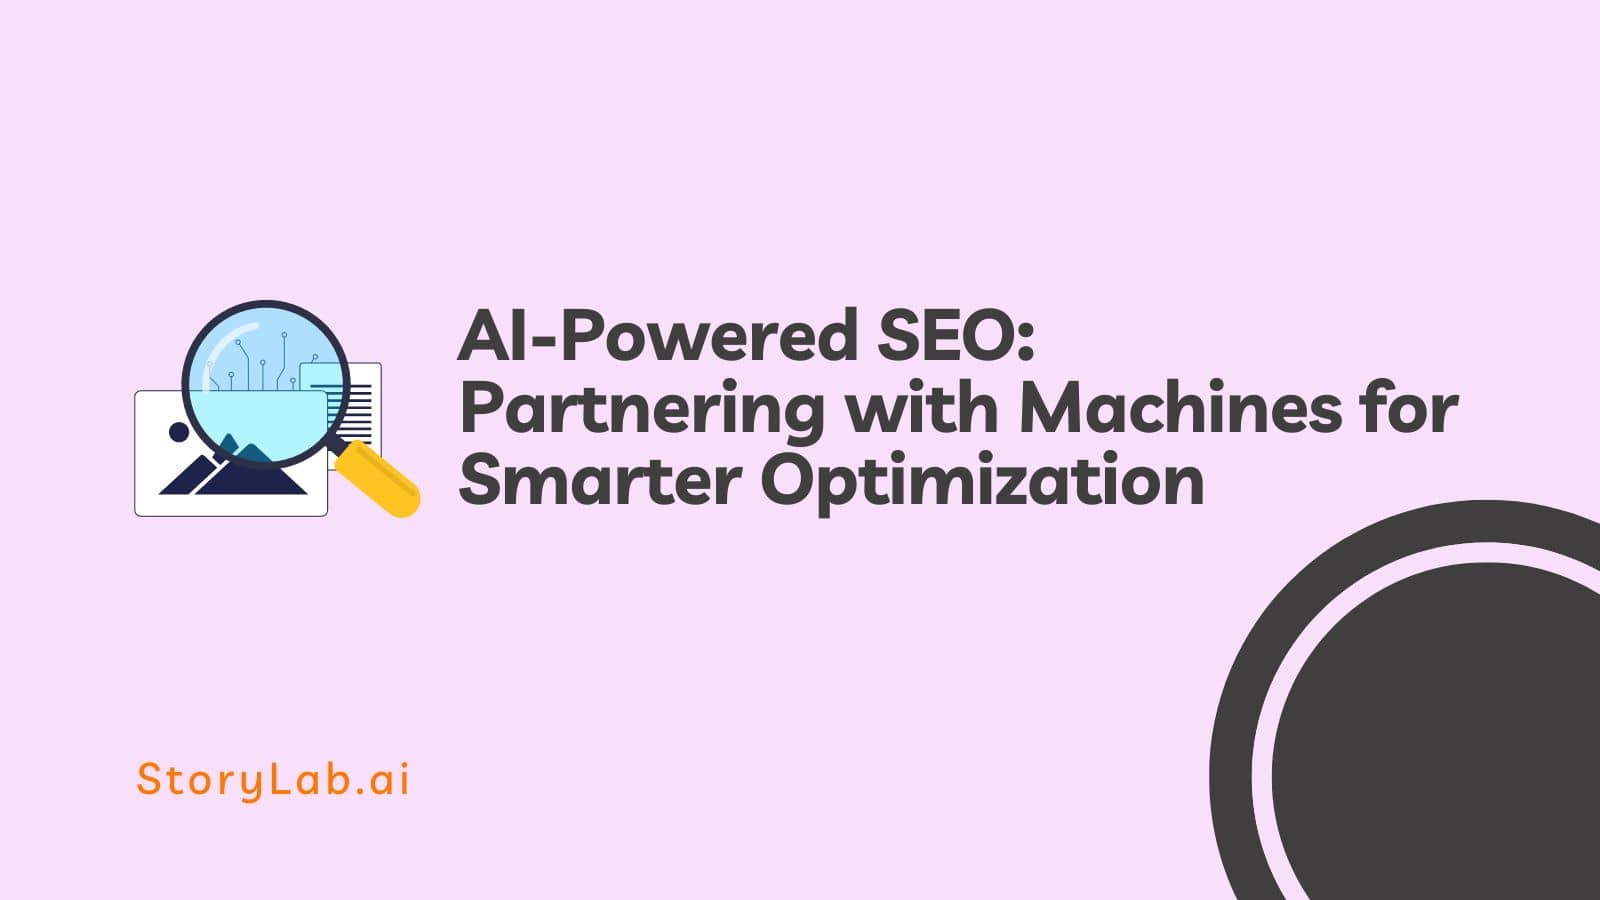 AI-Powered SEO Partnering with Machines for Smarter Optimization